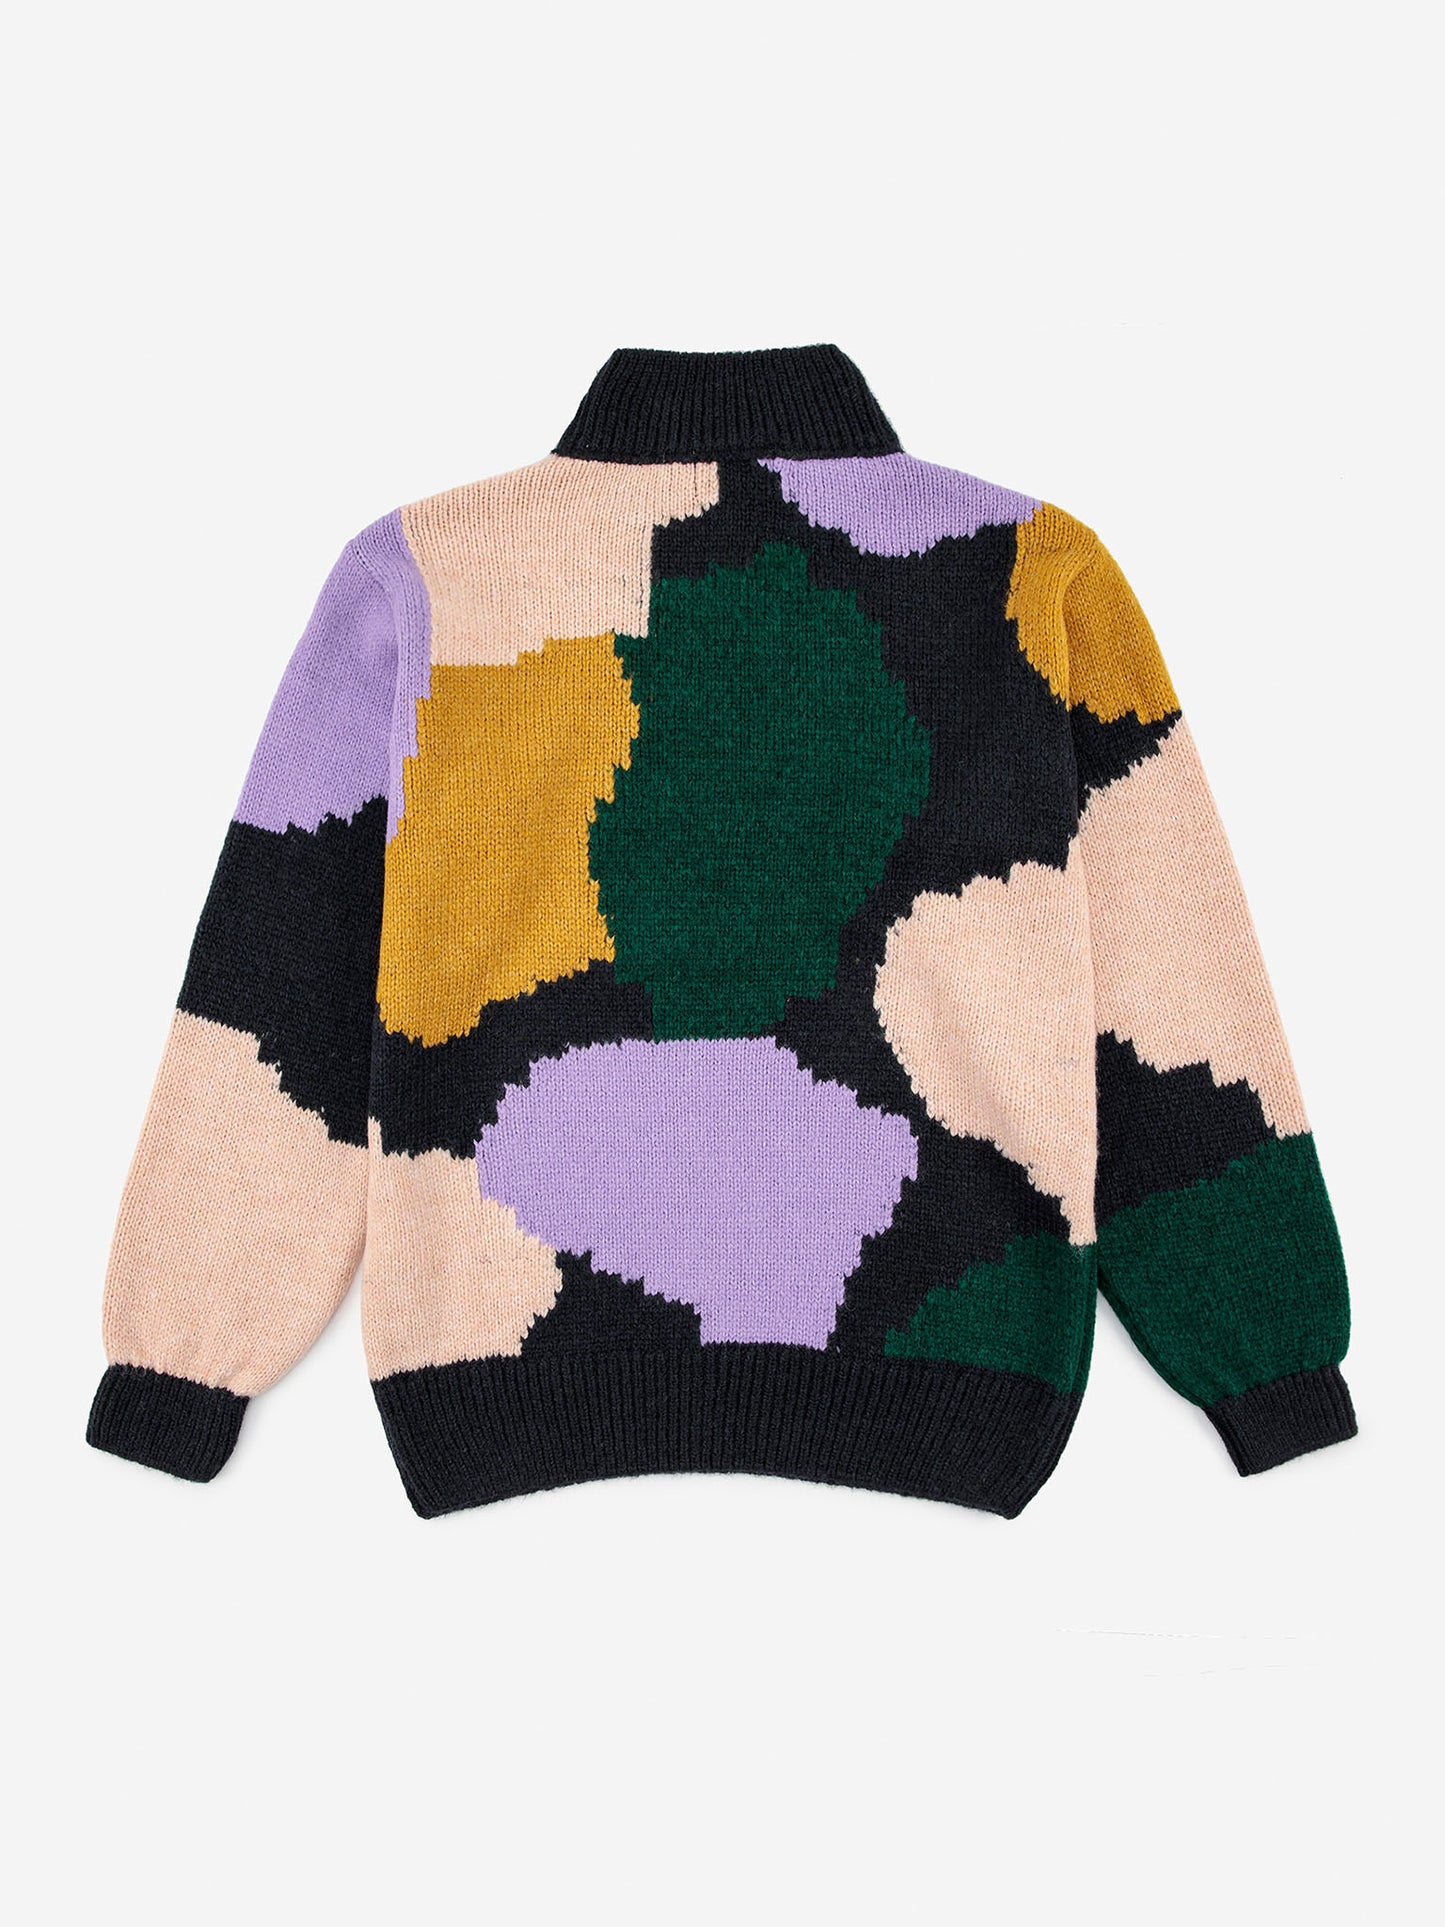 Multicolour jacquard high neck knitted jumper